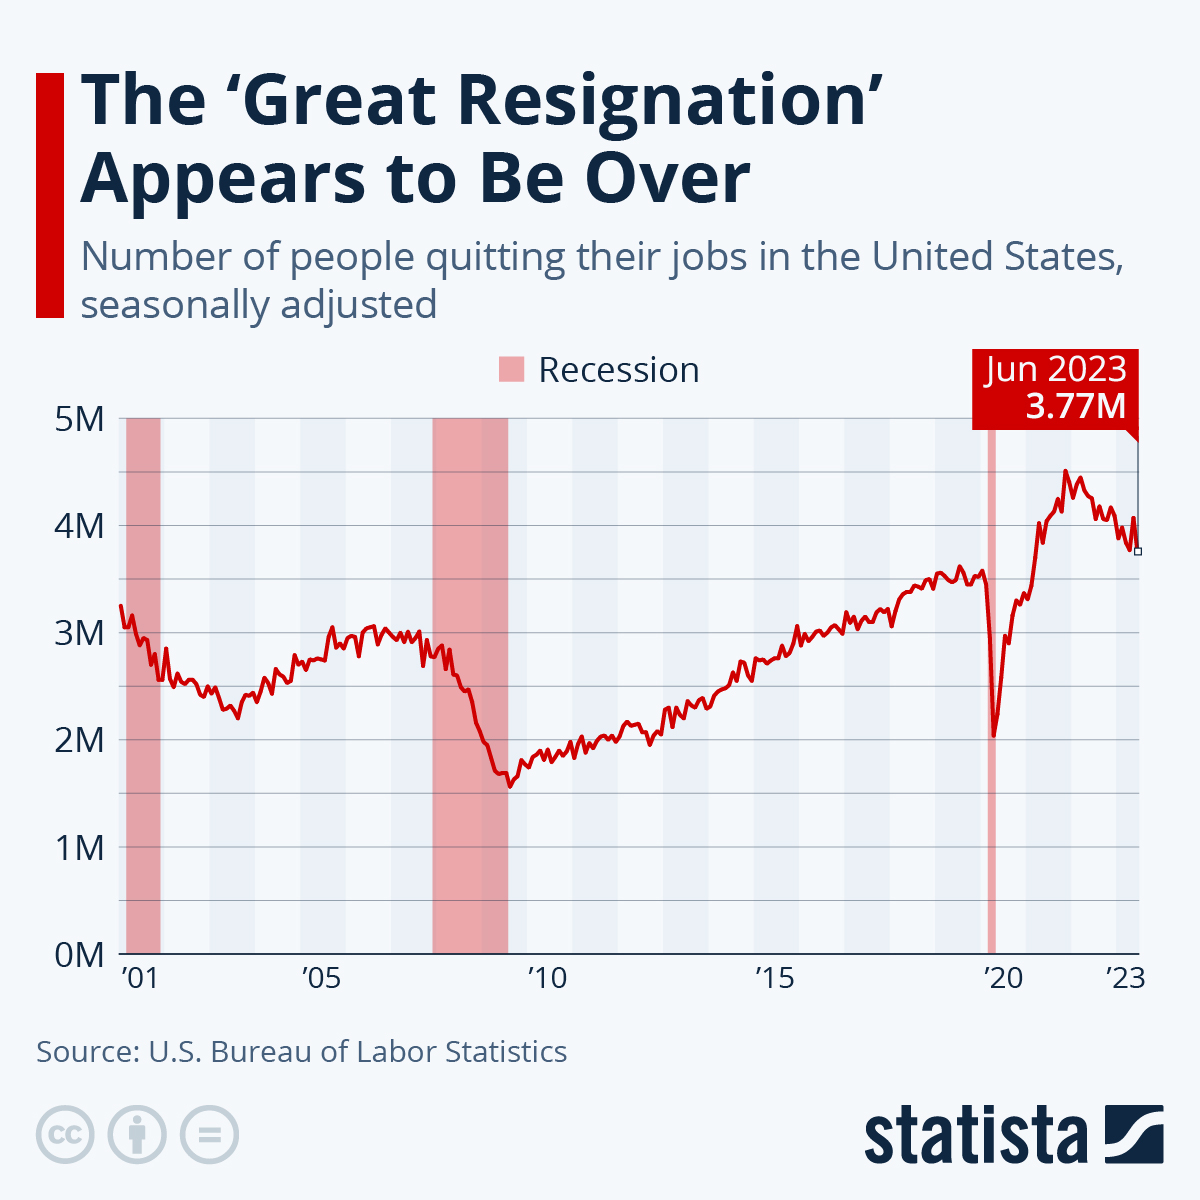 The great resignation appears to be over